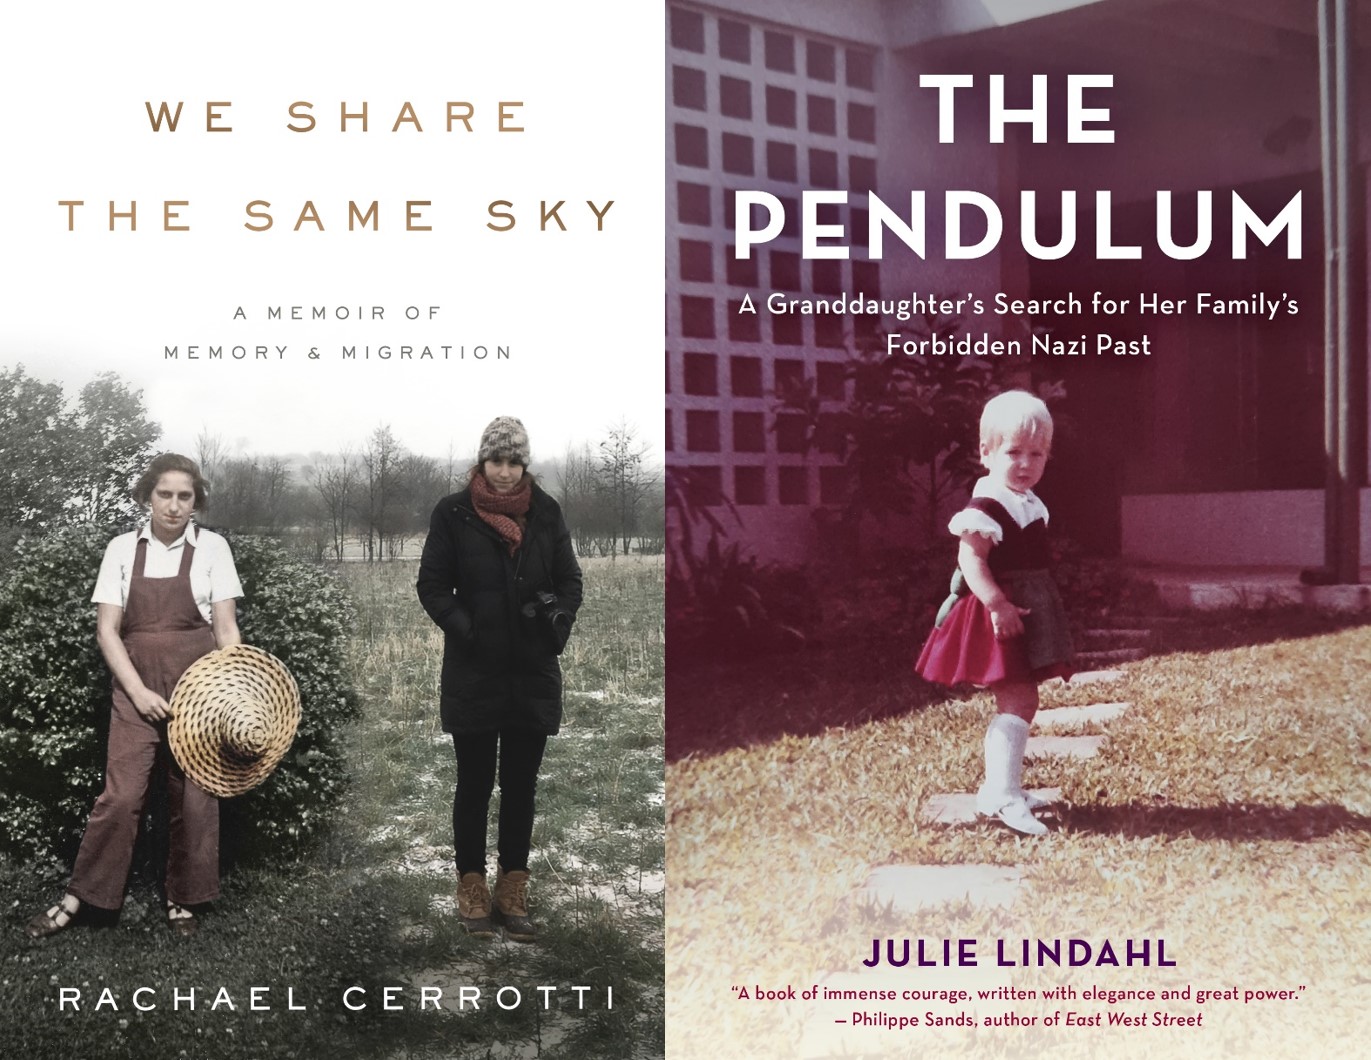 Covers of “We Share The Same Sky. A Memoir of and Migration” and “The Pendulum; A Granddaughter's Search for Her Family's Forbidden Nazi Past” 